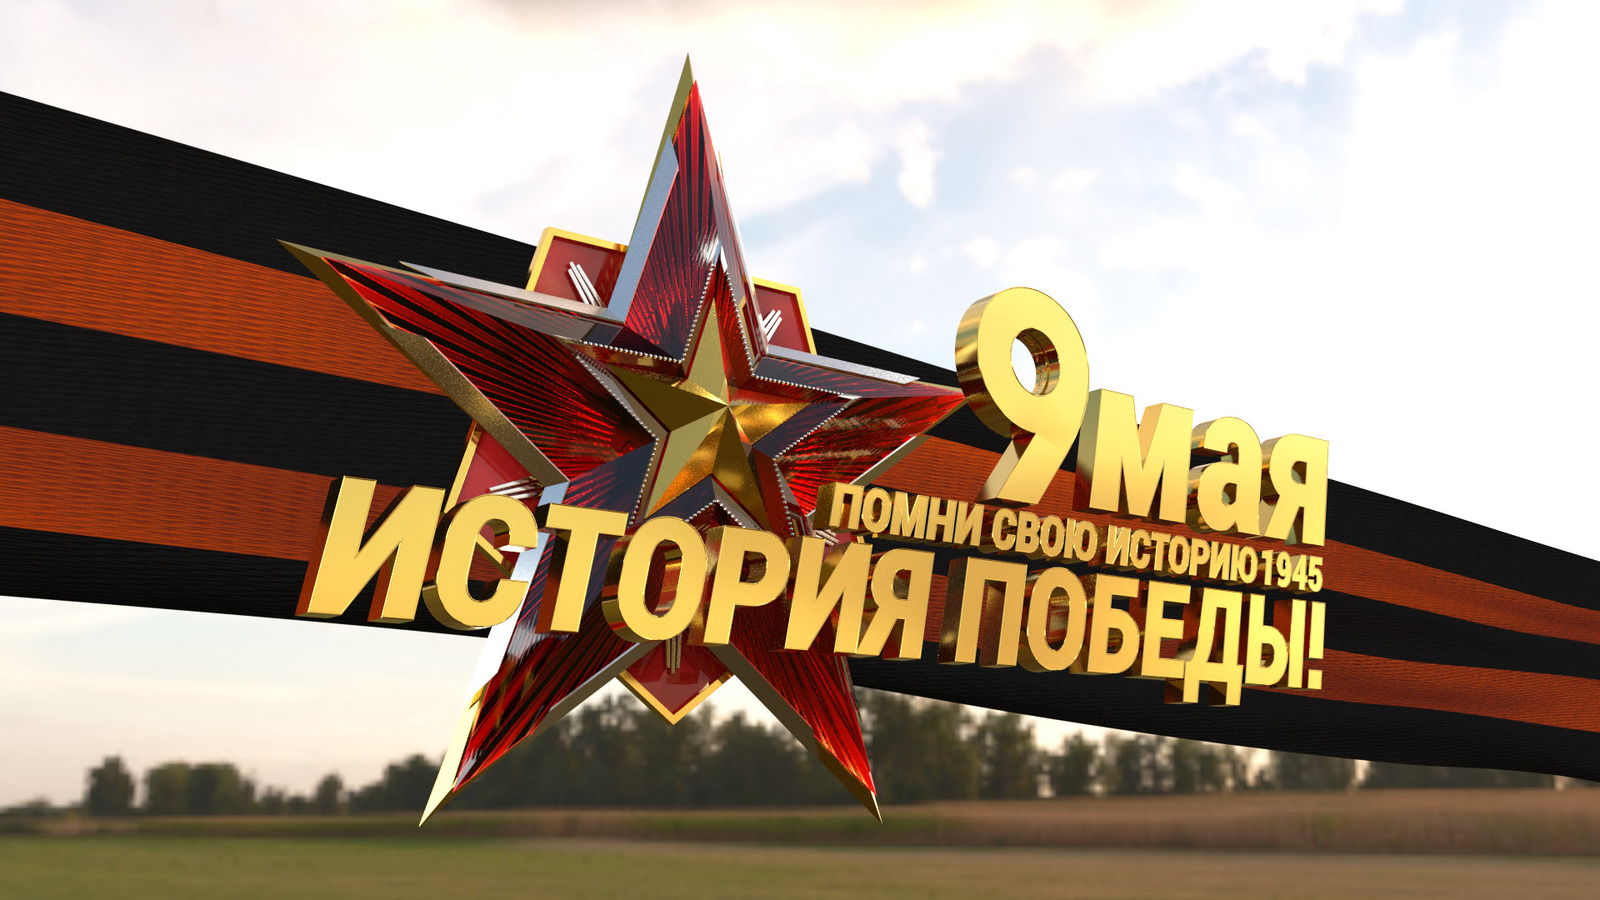 The first experience of creating a video in 3D editor. - May 9 - Victory Day, Longpost, Video, Redshift Render, Redshift, Cinema 4d, May 9, My